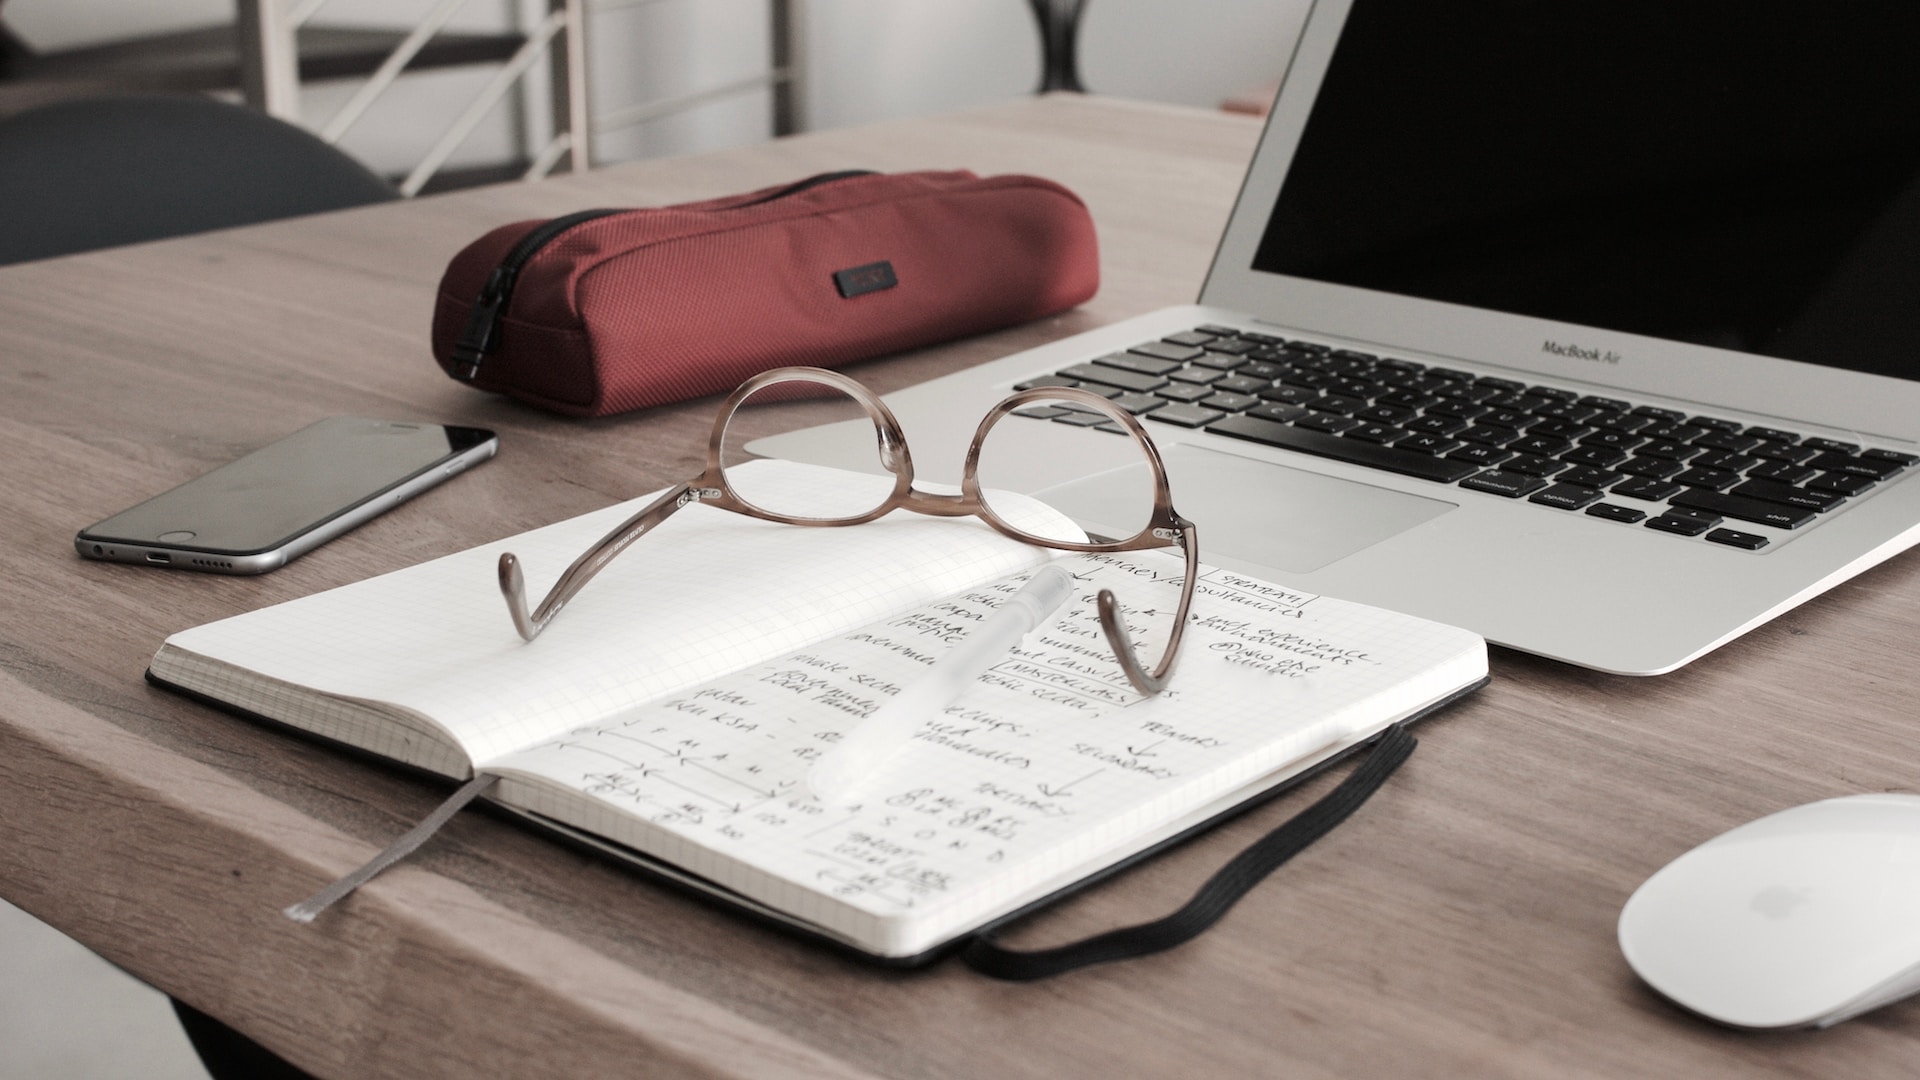 Glasses placed in front of a laptop and notebook